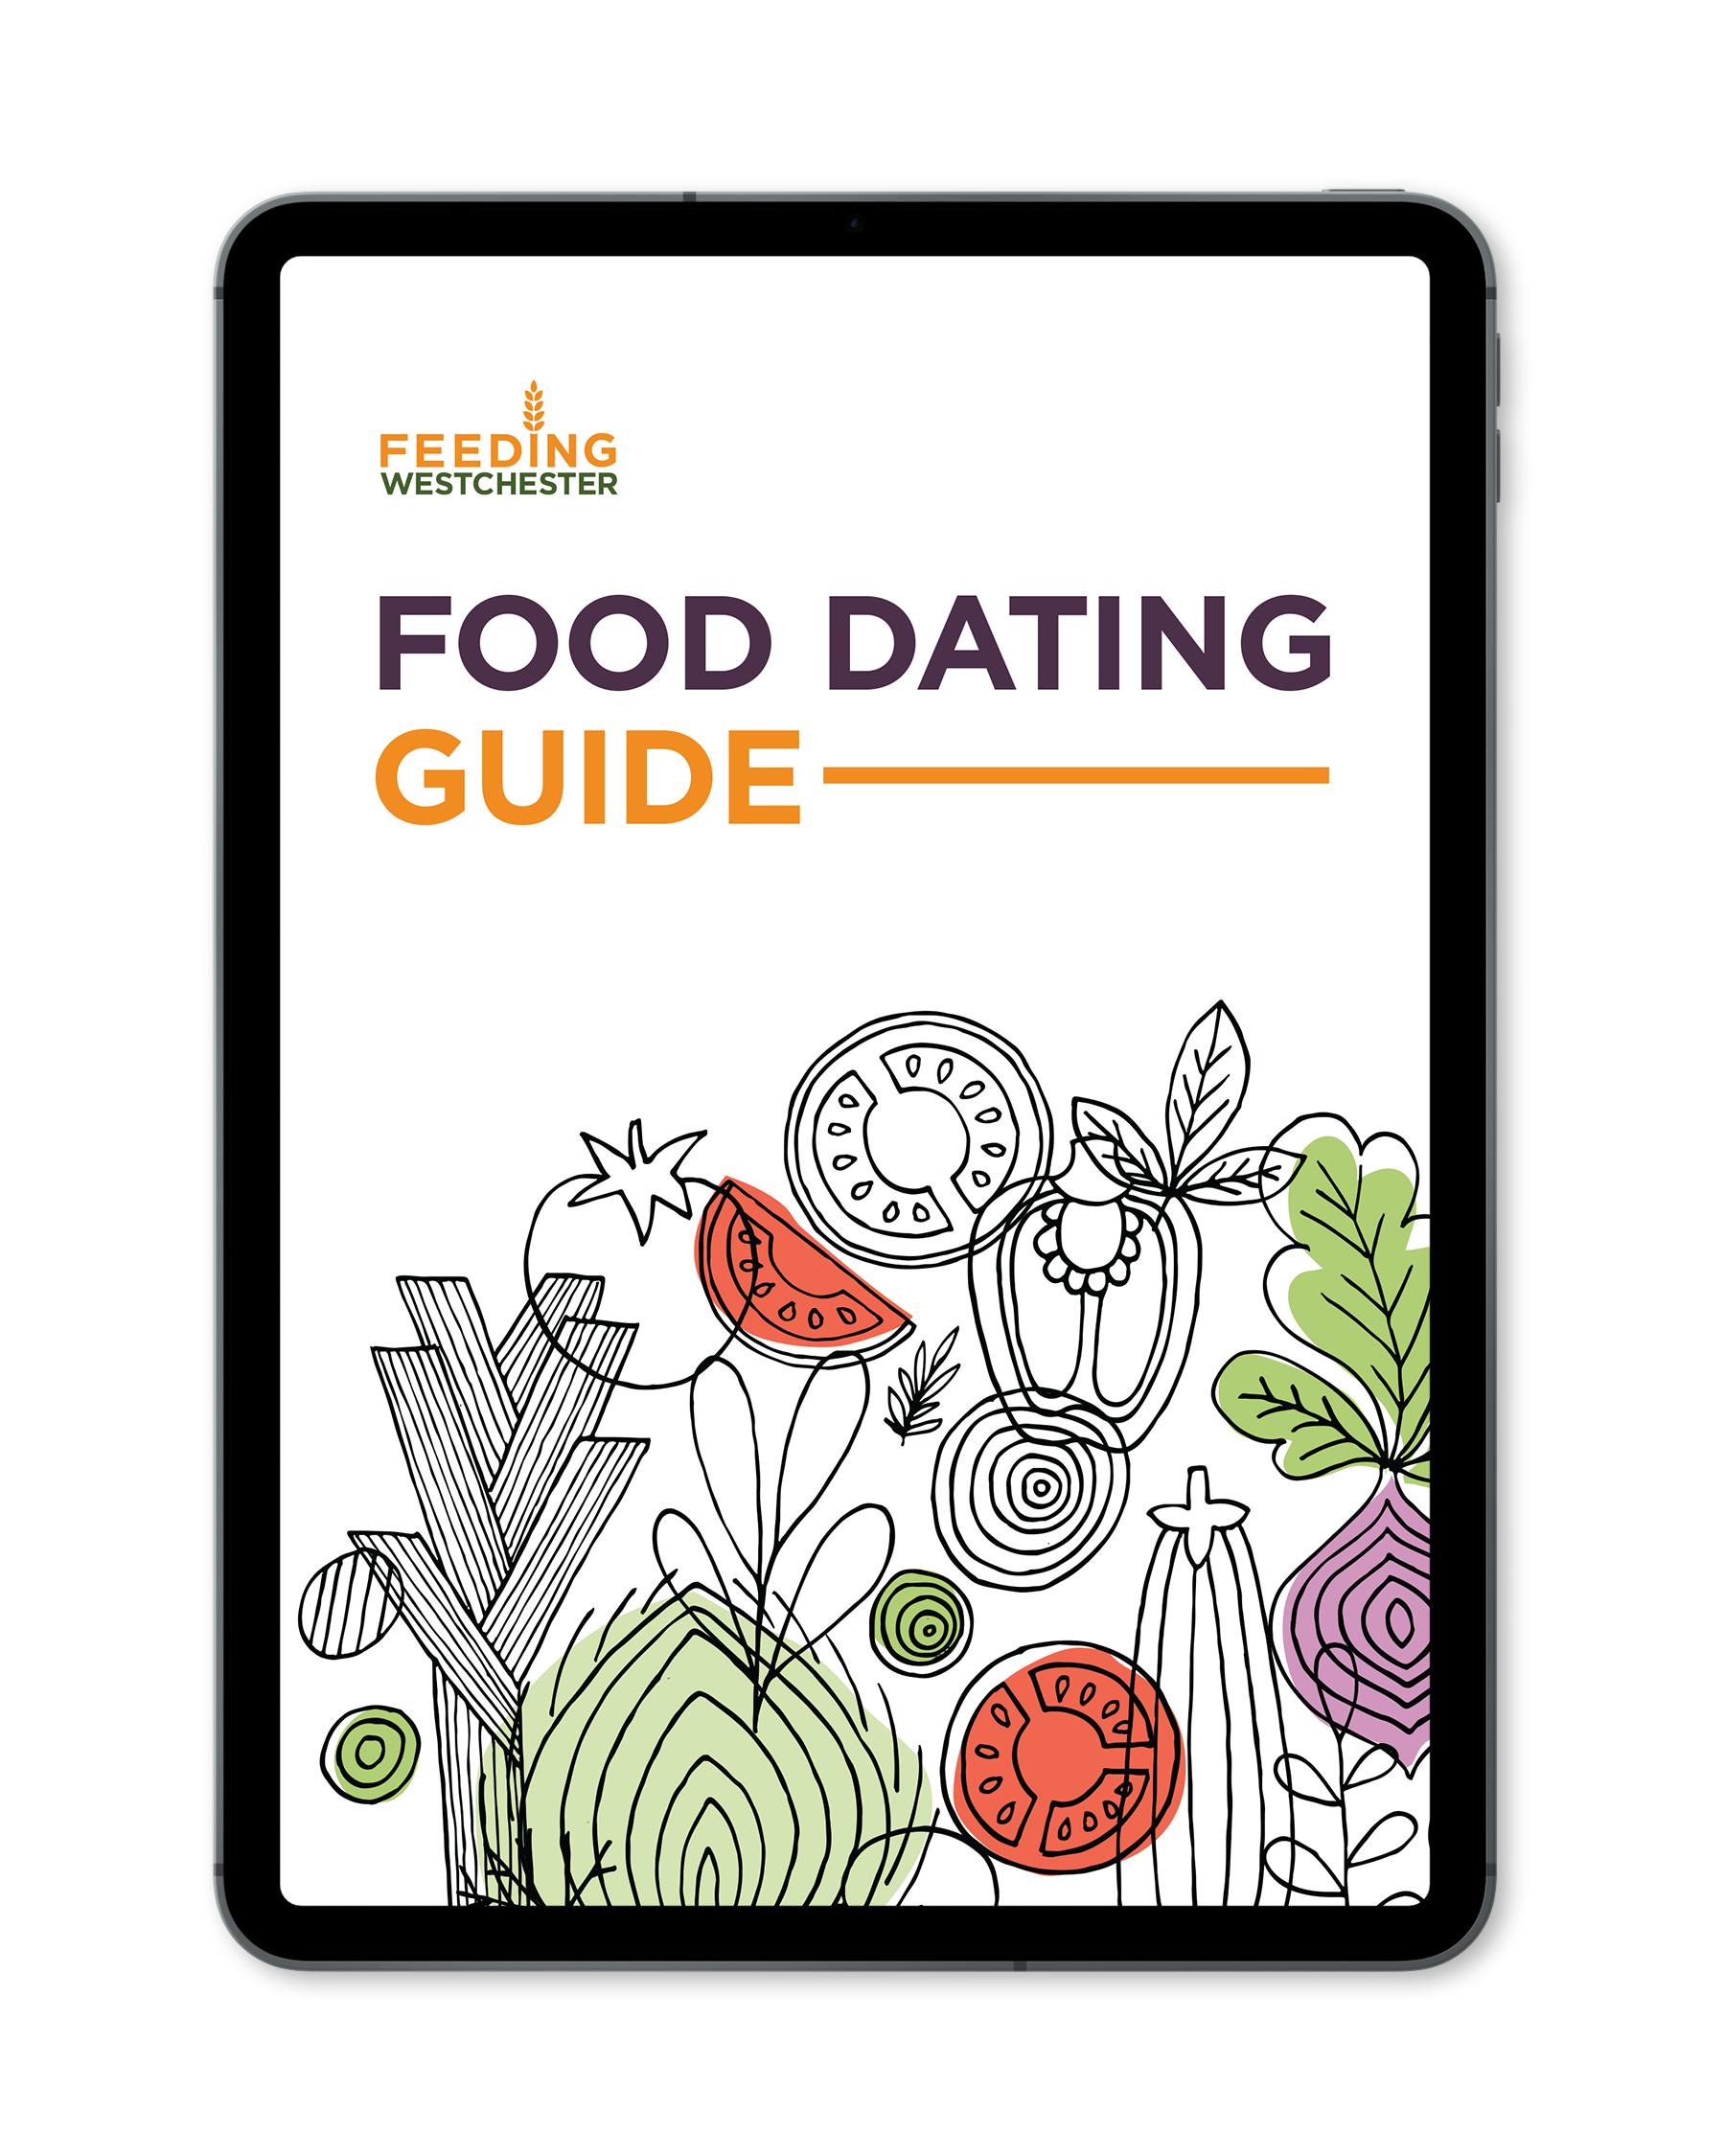 An image of an ipad showing the cover of the Food Dating Guide.